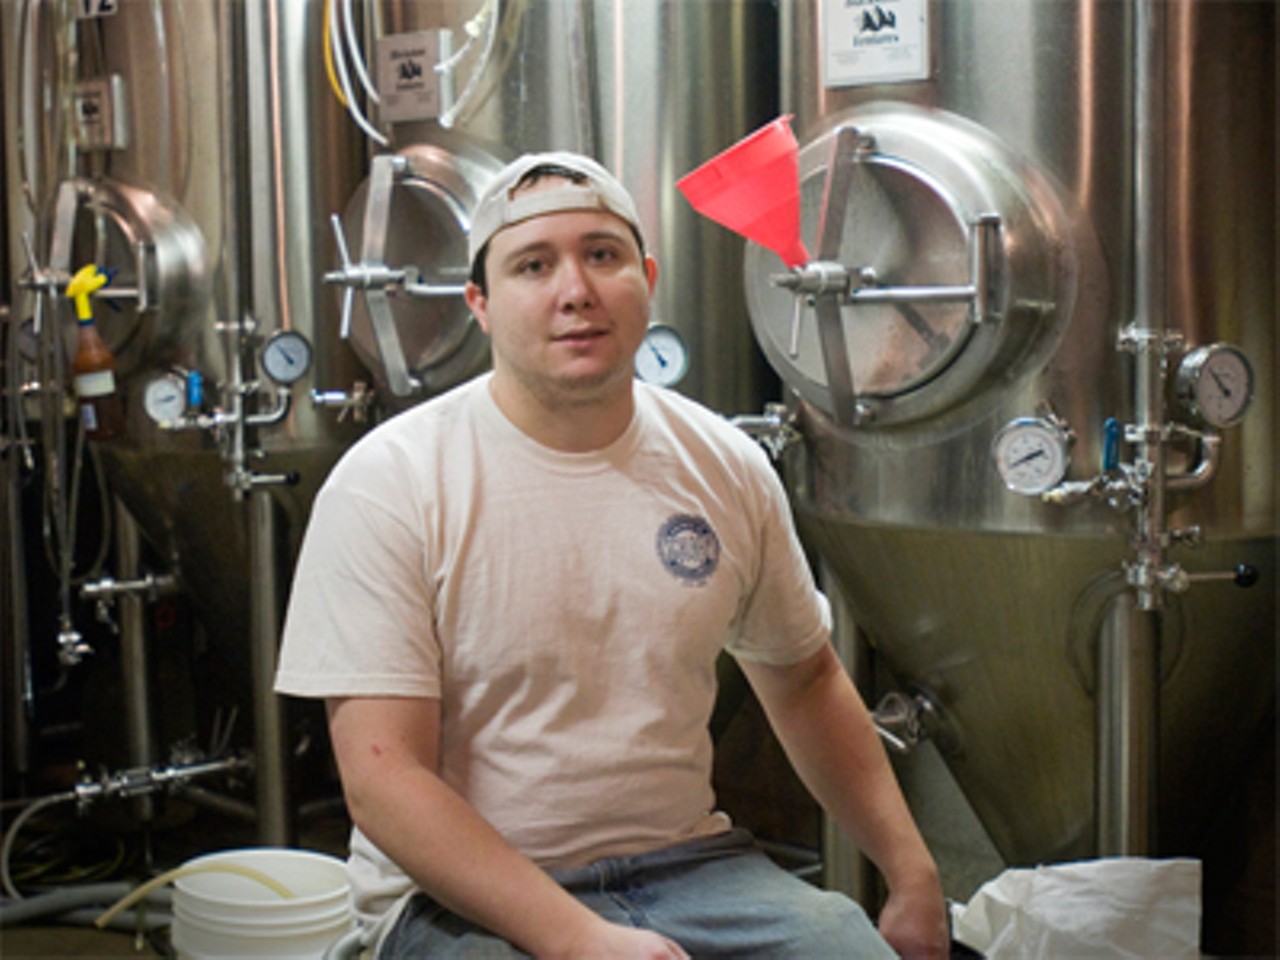 Mattinly Brewing Company's brewer and chemist Drew Huerter. 
Read "Tap City: How to approach Mattingly Brewing Company? Go for the beer. Stay for the beer." by Ian Froeb.